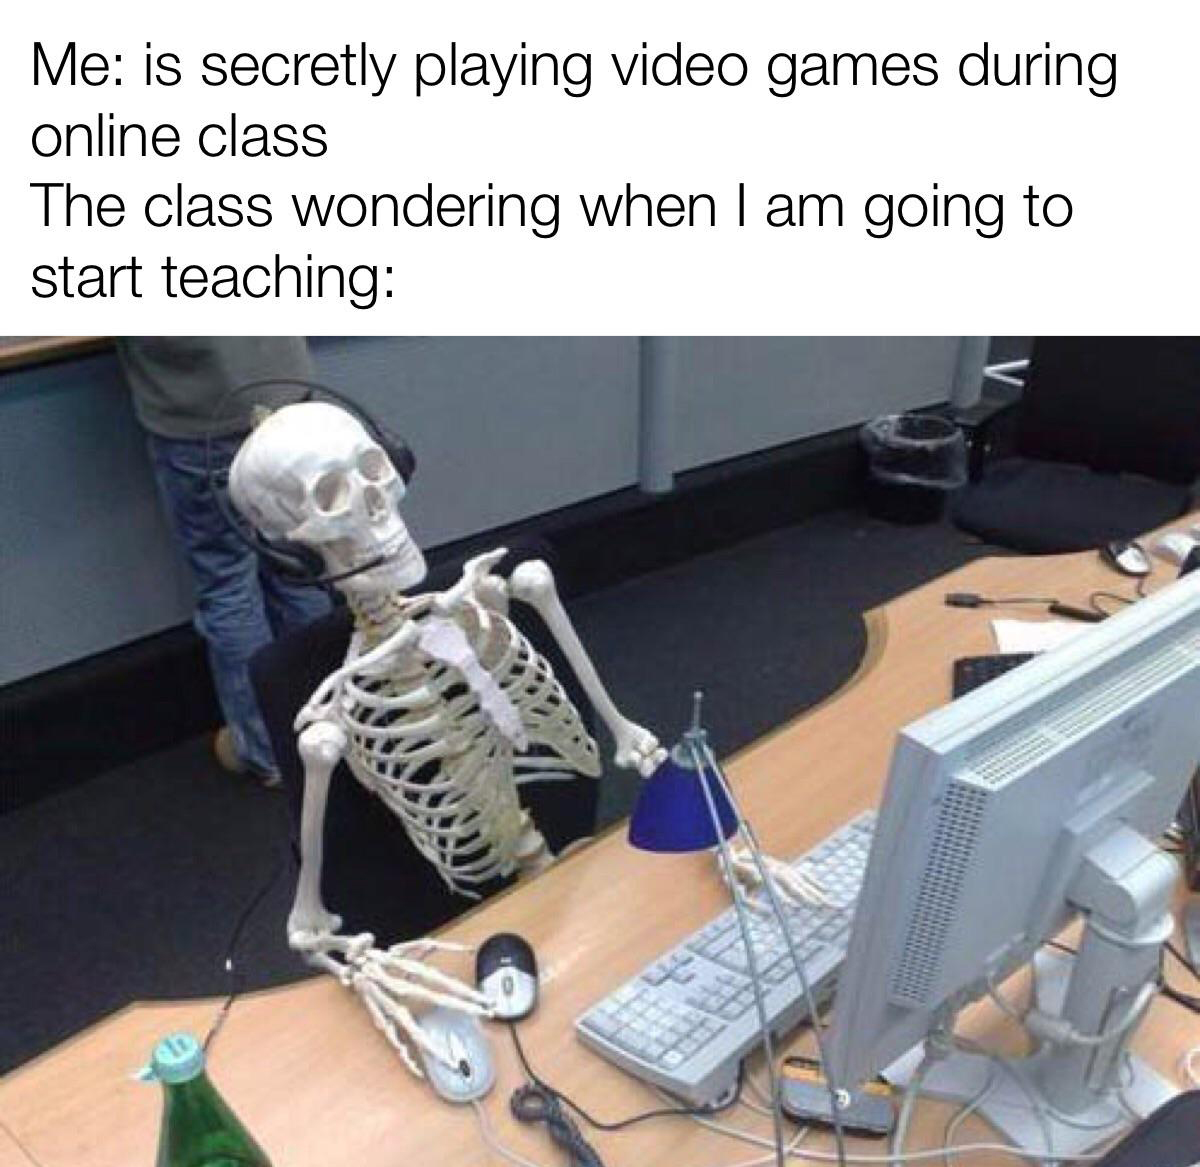 dank memes - funny memes - skeleton waiting pc - Me is secretly playing video games during online class The class wondering when I am going to start teaching